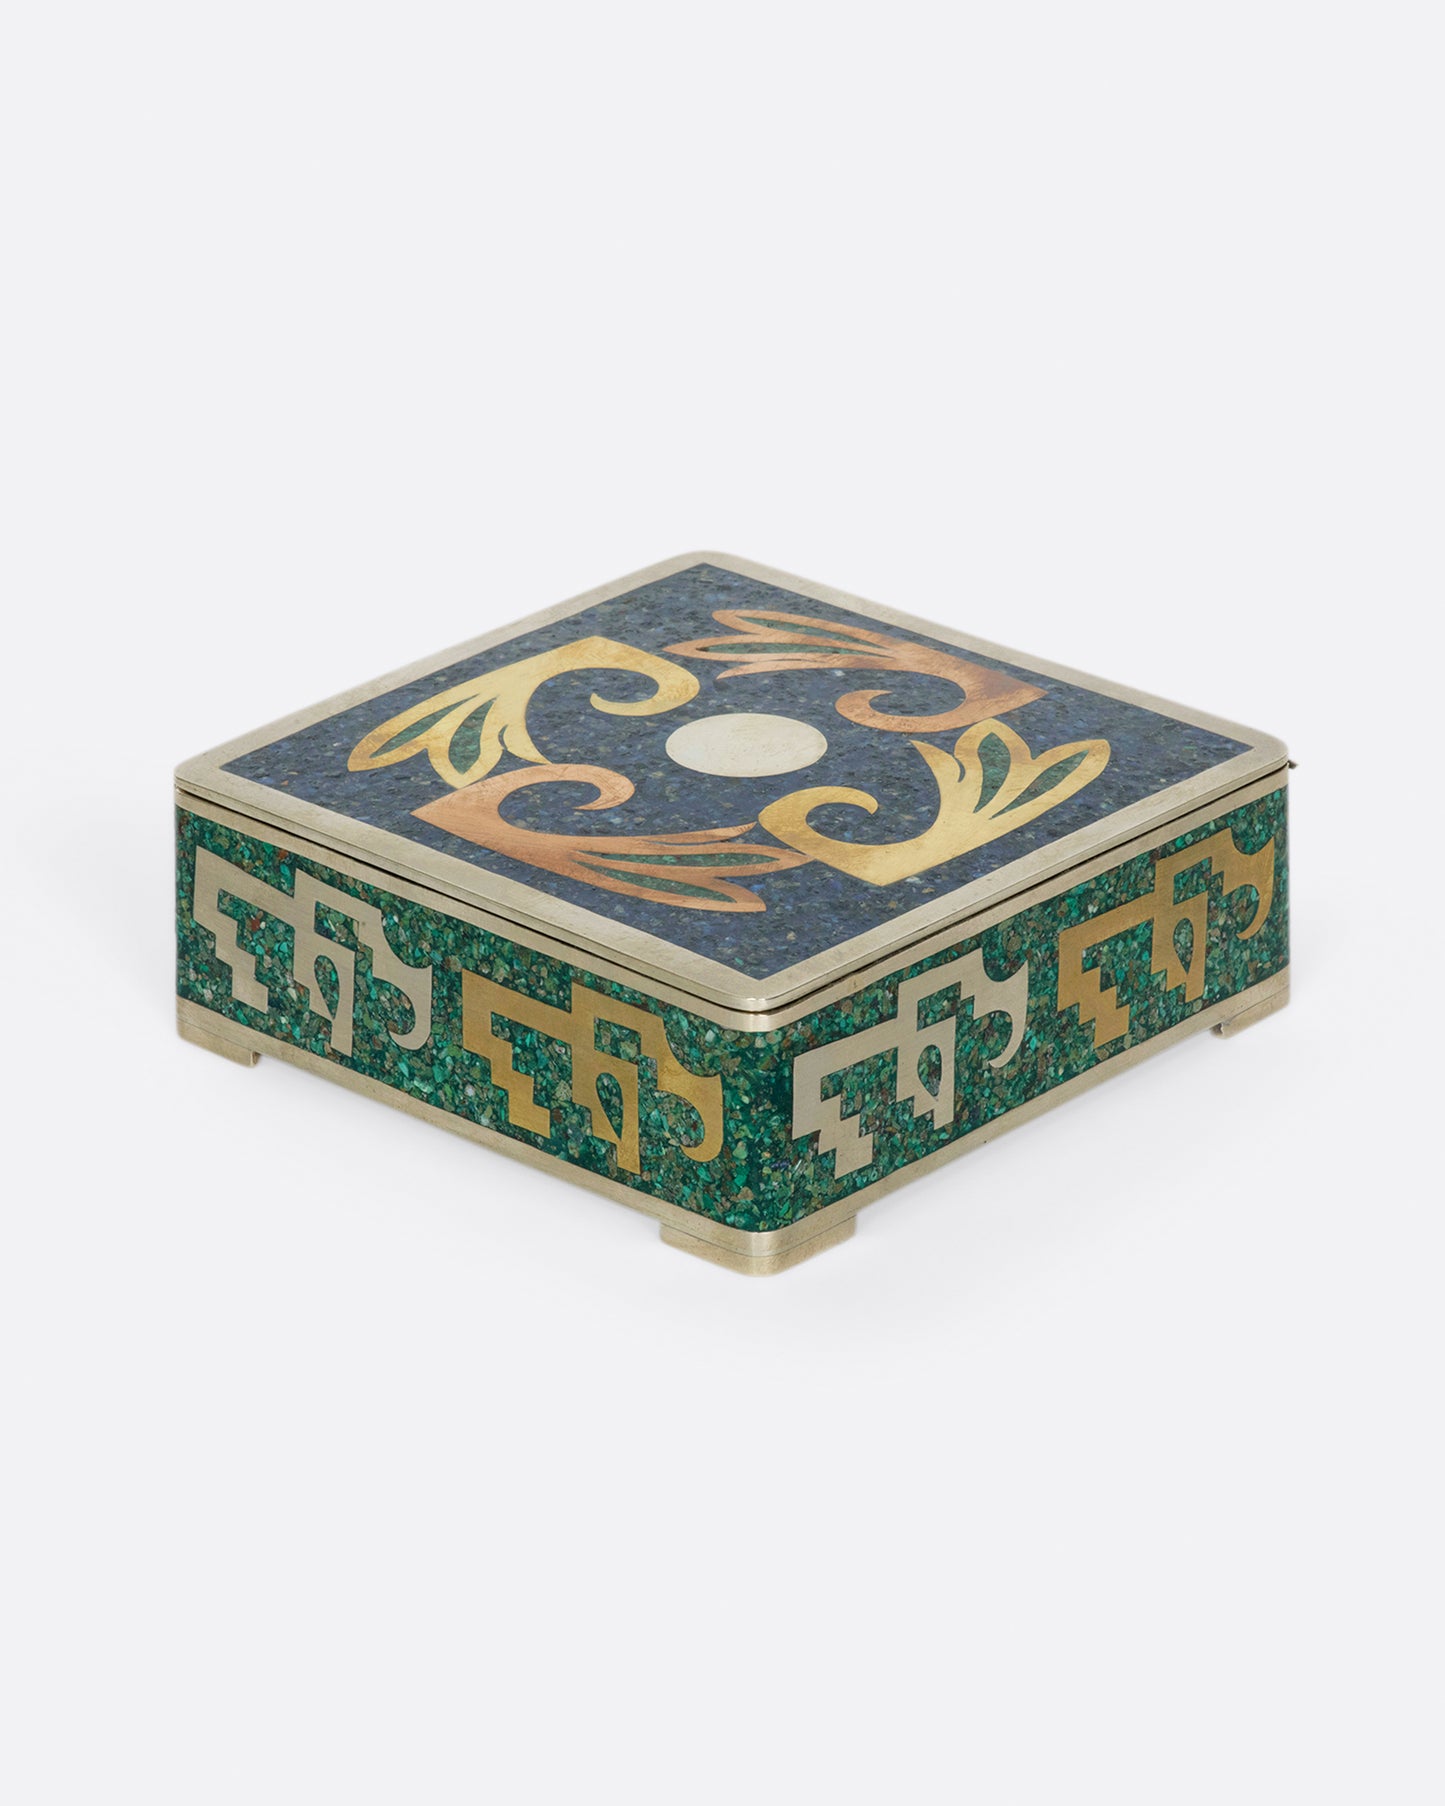 A Mexican, hinged box covered in sodalite malachite inlay and lined with wood.